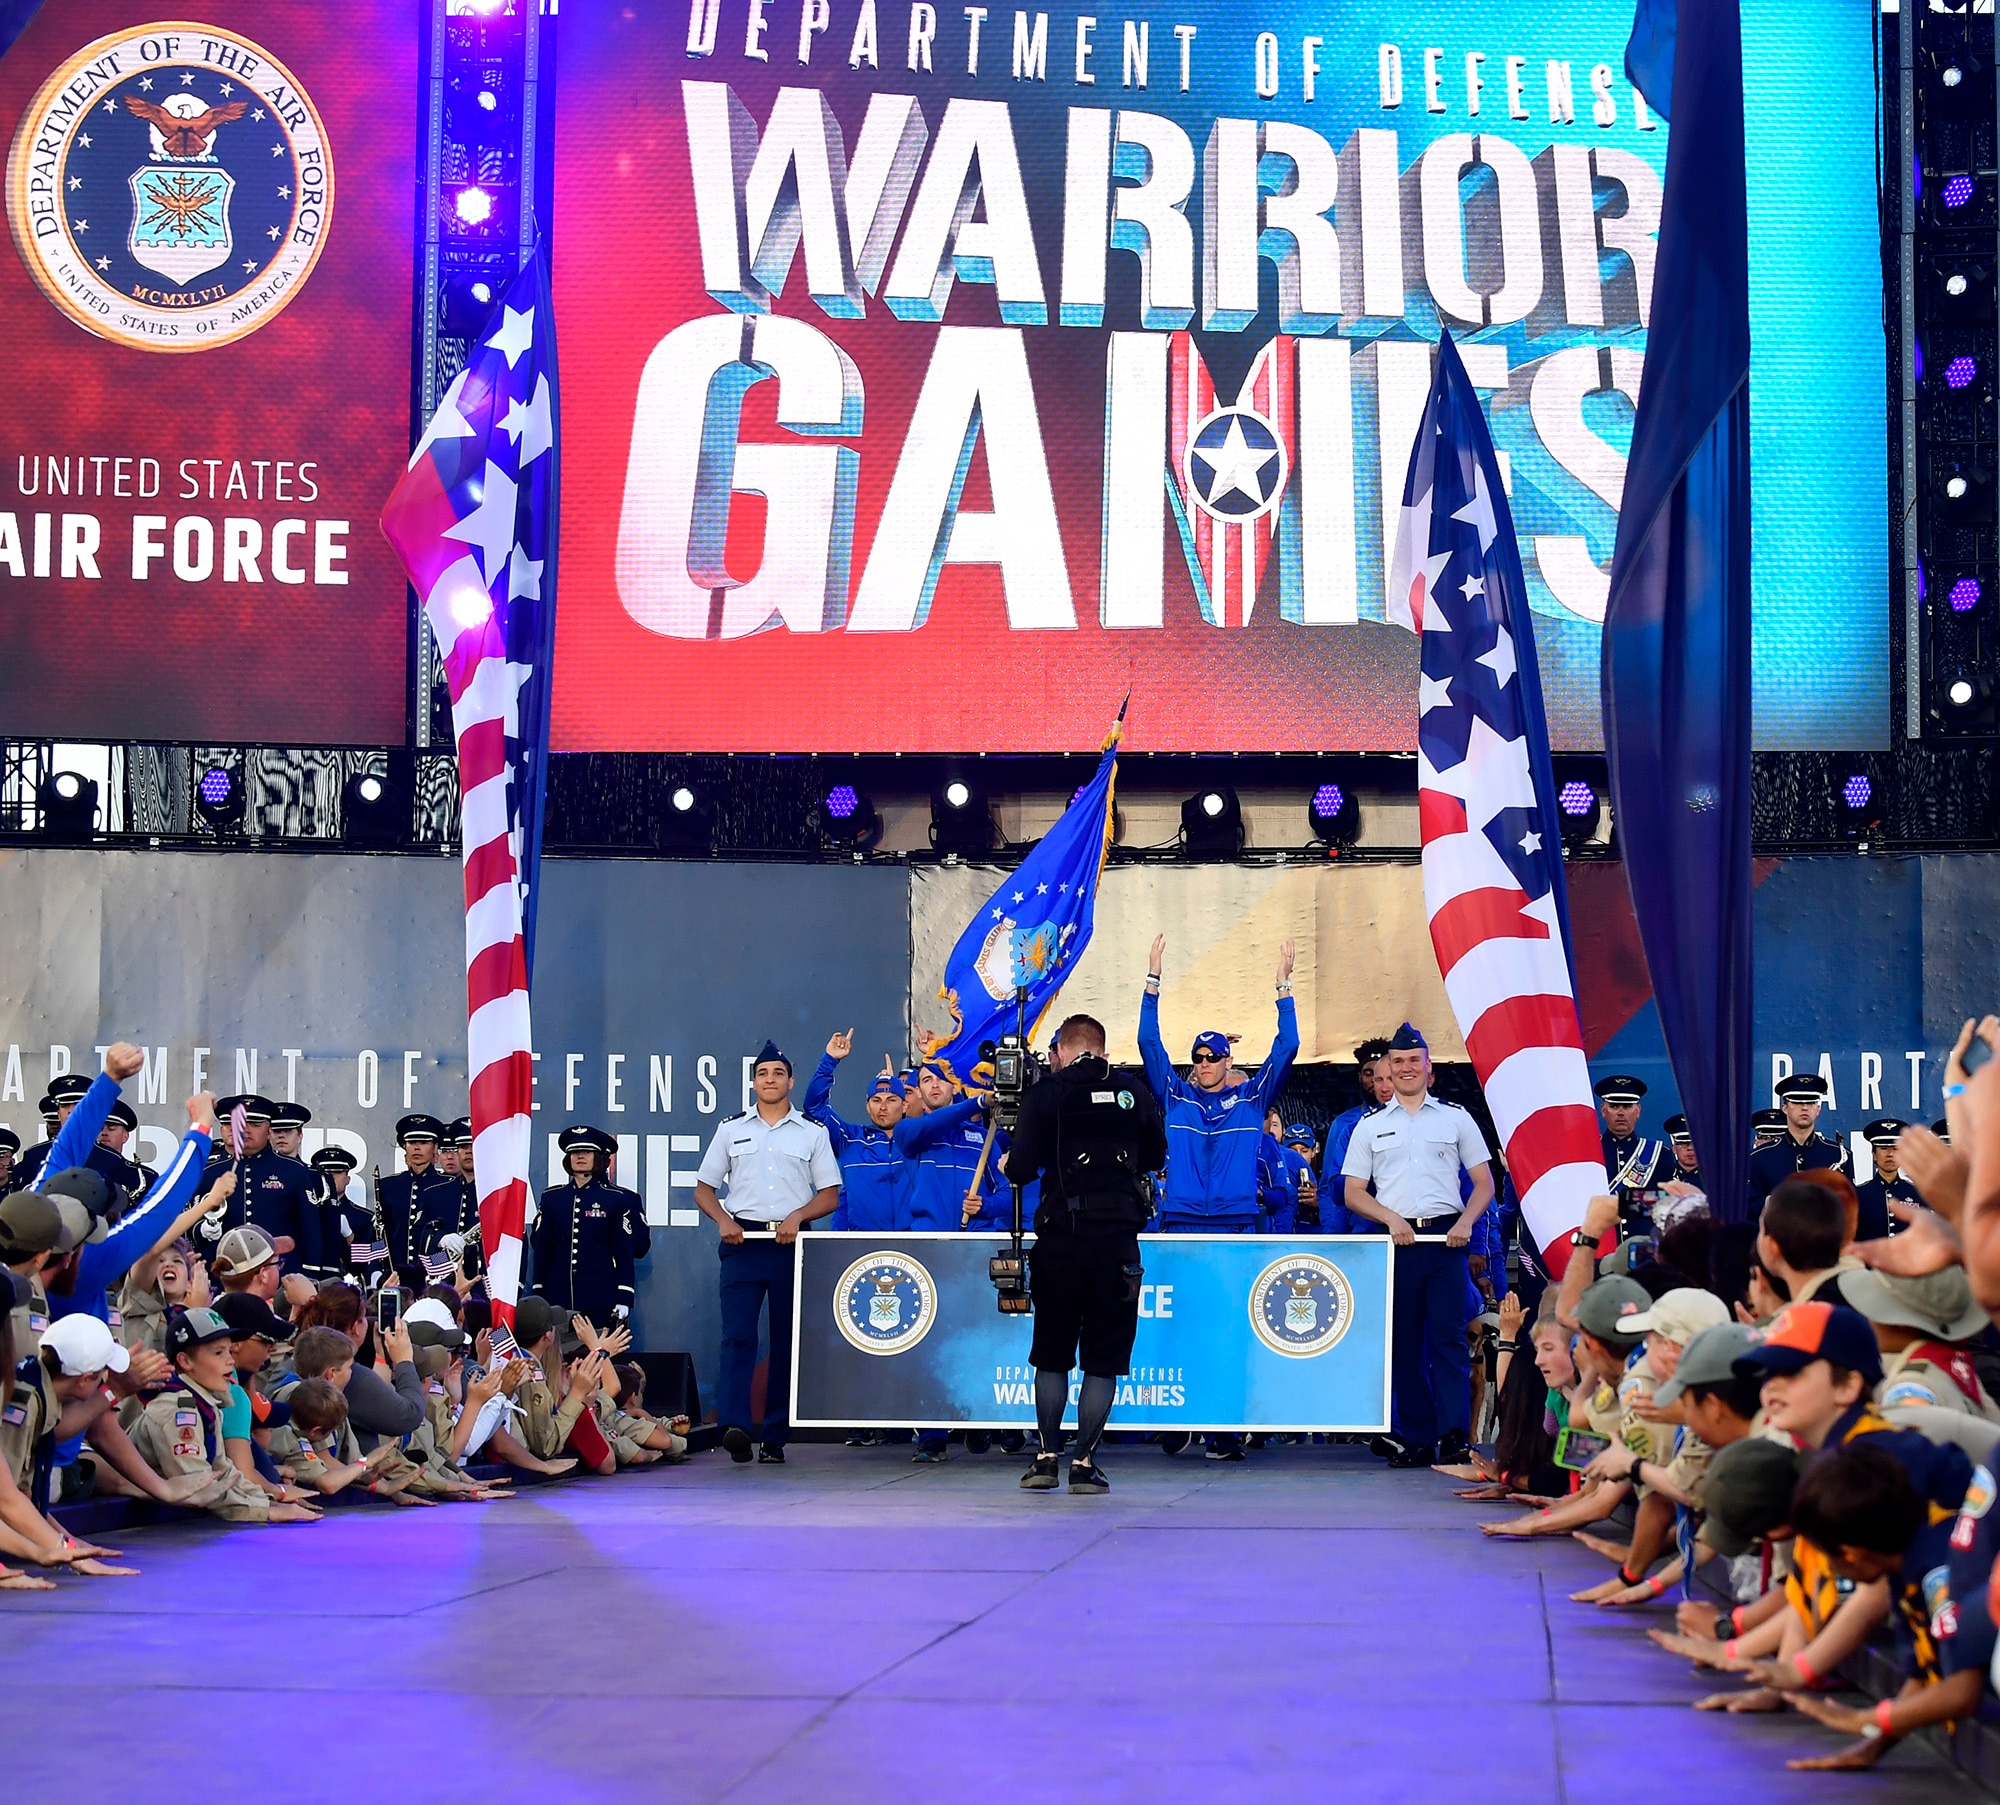 Team Air Force walks down the ramp during the opening ceremony of the Department of Defense Warrior Games at the U.S. Air Force Academy in Colorado Springs, Colorado, June 2, 2018. There are 39 athletes representing Team Air Force at the Games, competing against wounded, ill and injured service members and veterans representing the U.S. Army, Marine Corps, Navy, and Special Operations Command, as well as athletes from the United Kingdom Armed Forces, Australian Defence Force and Canadian Armed Forces. (U.S. Air Force photo by Staff Sgt. Rusty Frank)